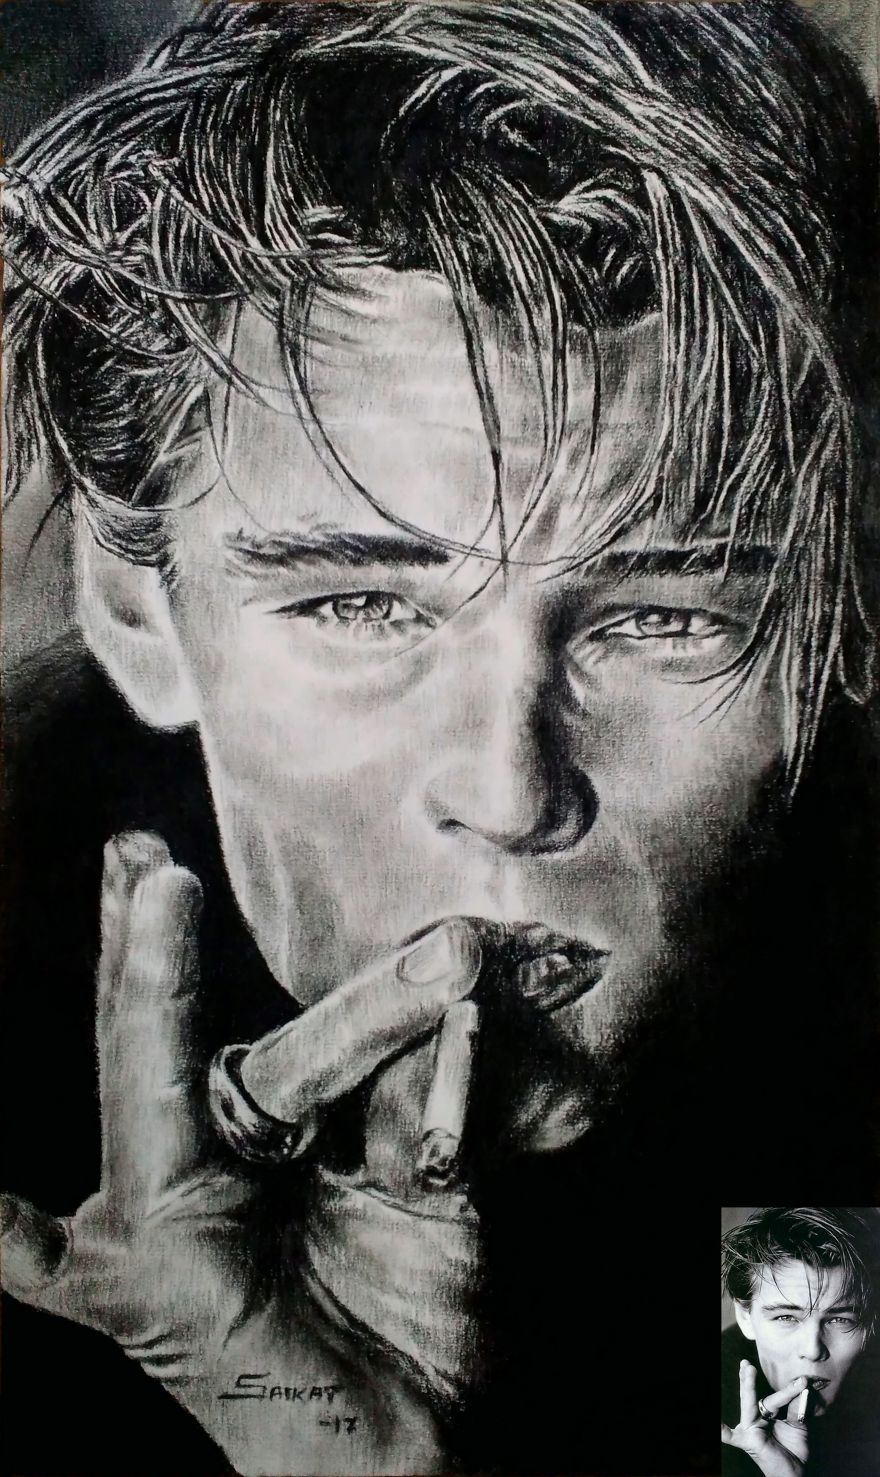 It Took Me 1 Day To Draw This Charcoal Pencil Portrait Of Leonardo Di Caprio